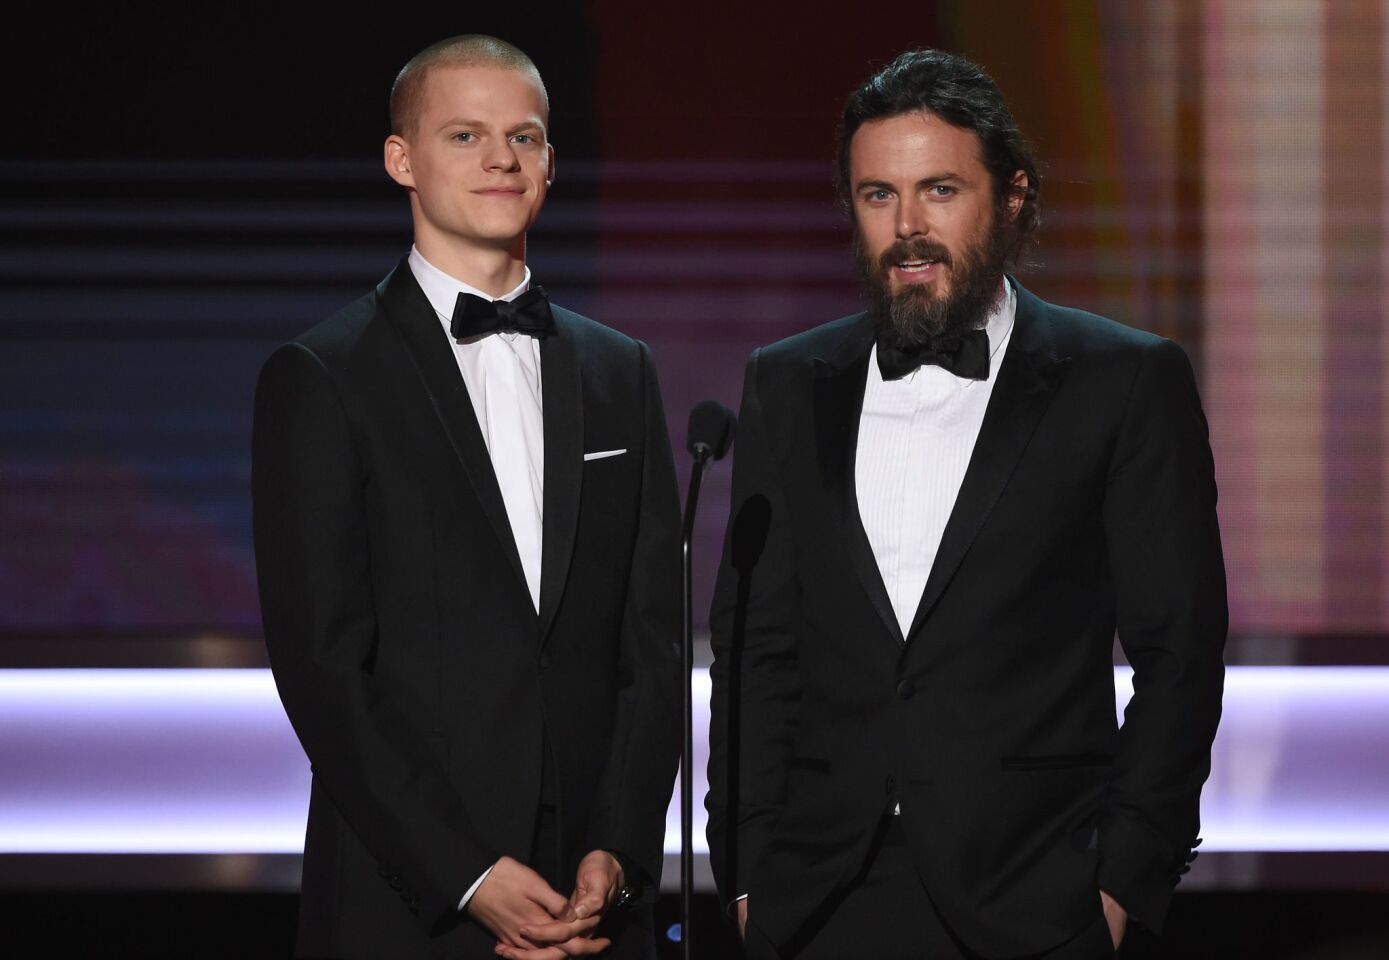 ctors Lucas Hedges (L) and Casey Affleck speak onstage during the 23rd Annual Screen Actors Guild Awards show at The Shrine Auditorium on January 29, 2017 in Los Angeles, California. / AFP PHOTO / Robyn BECKROBYN BECK/AFP/Getty Images ** OUTS - ELSENT, FPG, CM - OUTS * NM, PH, VA if sourced by CT, LA or MoD **